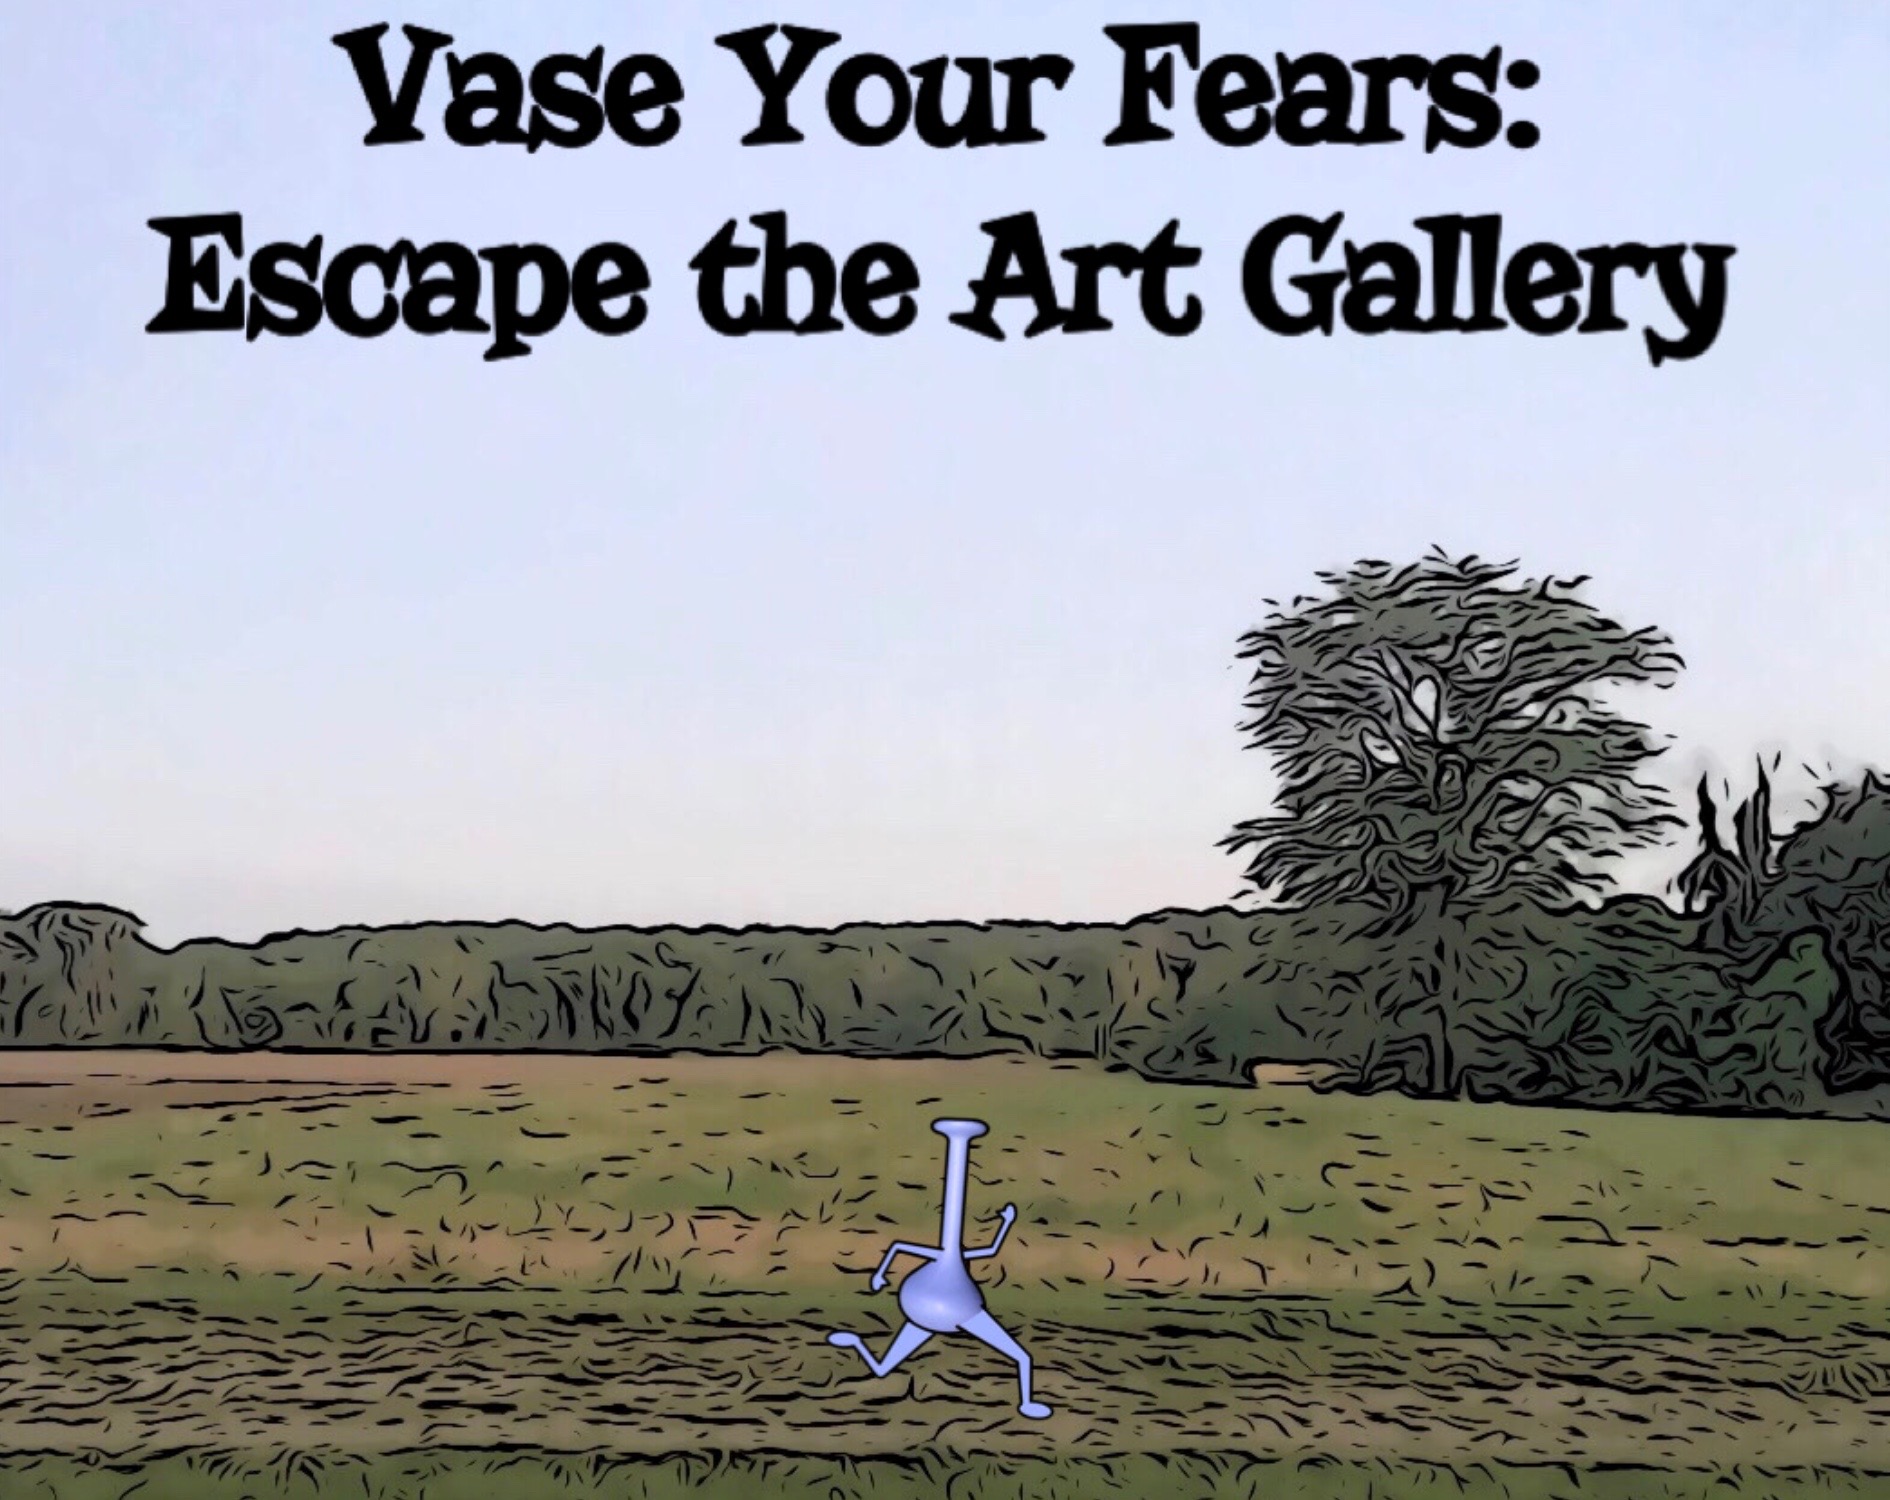 Vase Your Fears: Escape the Art Gallery